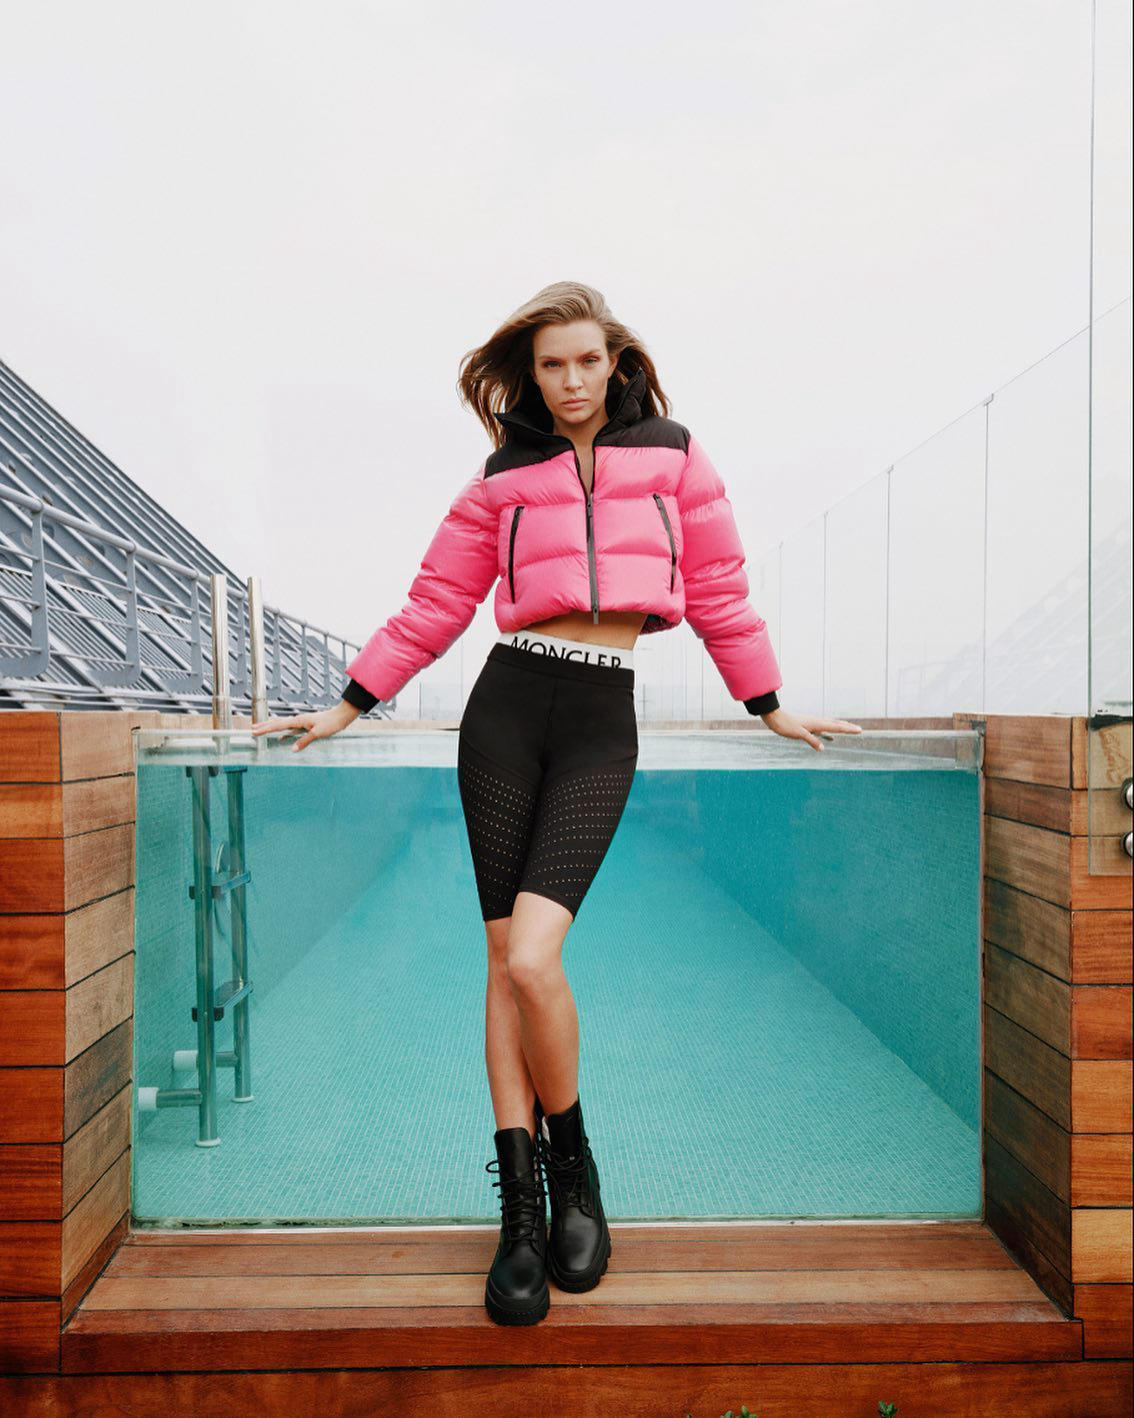 Josephine Skriver accompanied the breathtaking view of Istanbul at The Roof with the highlights of t